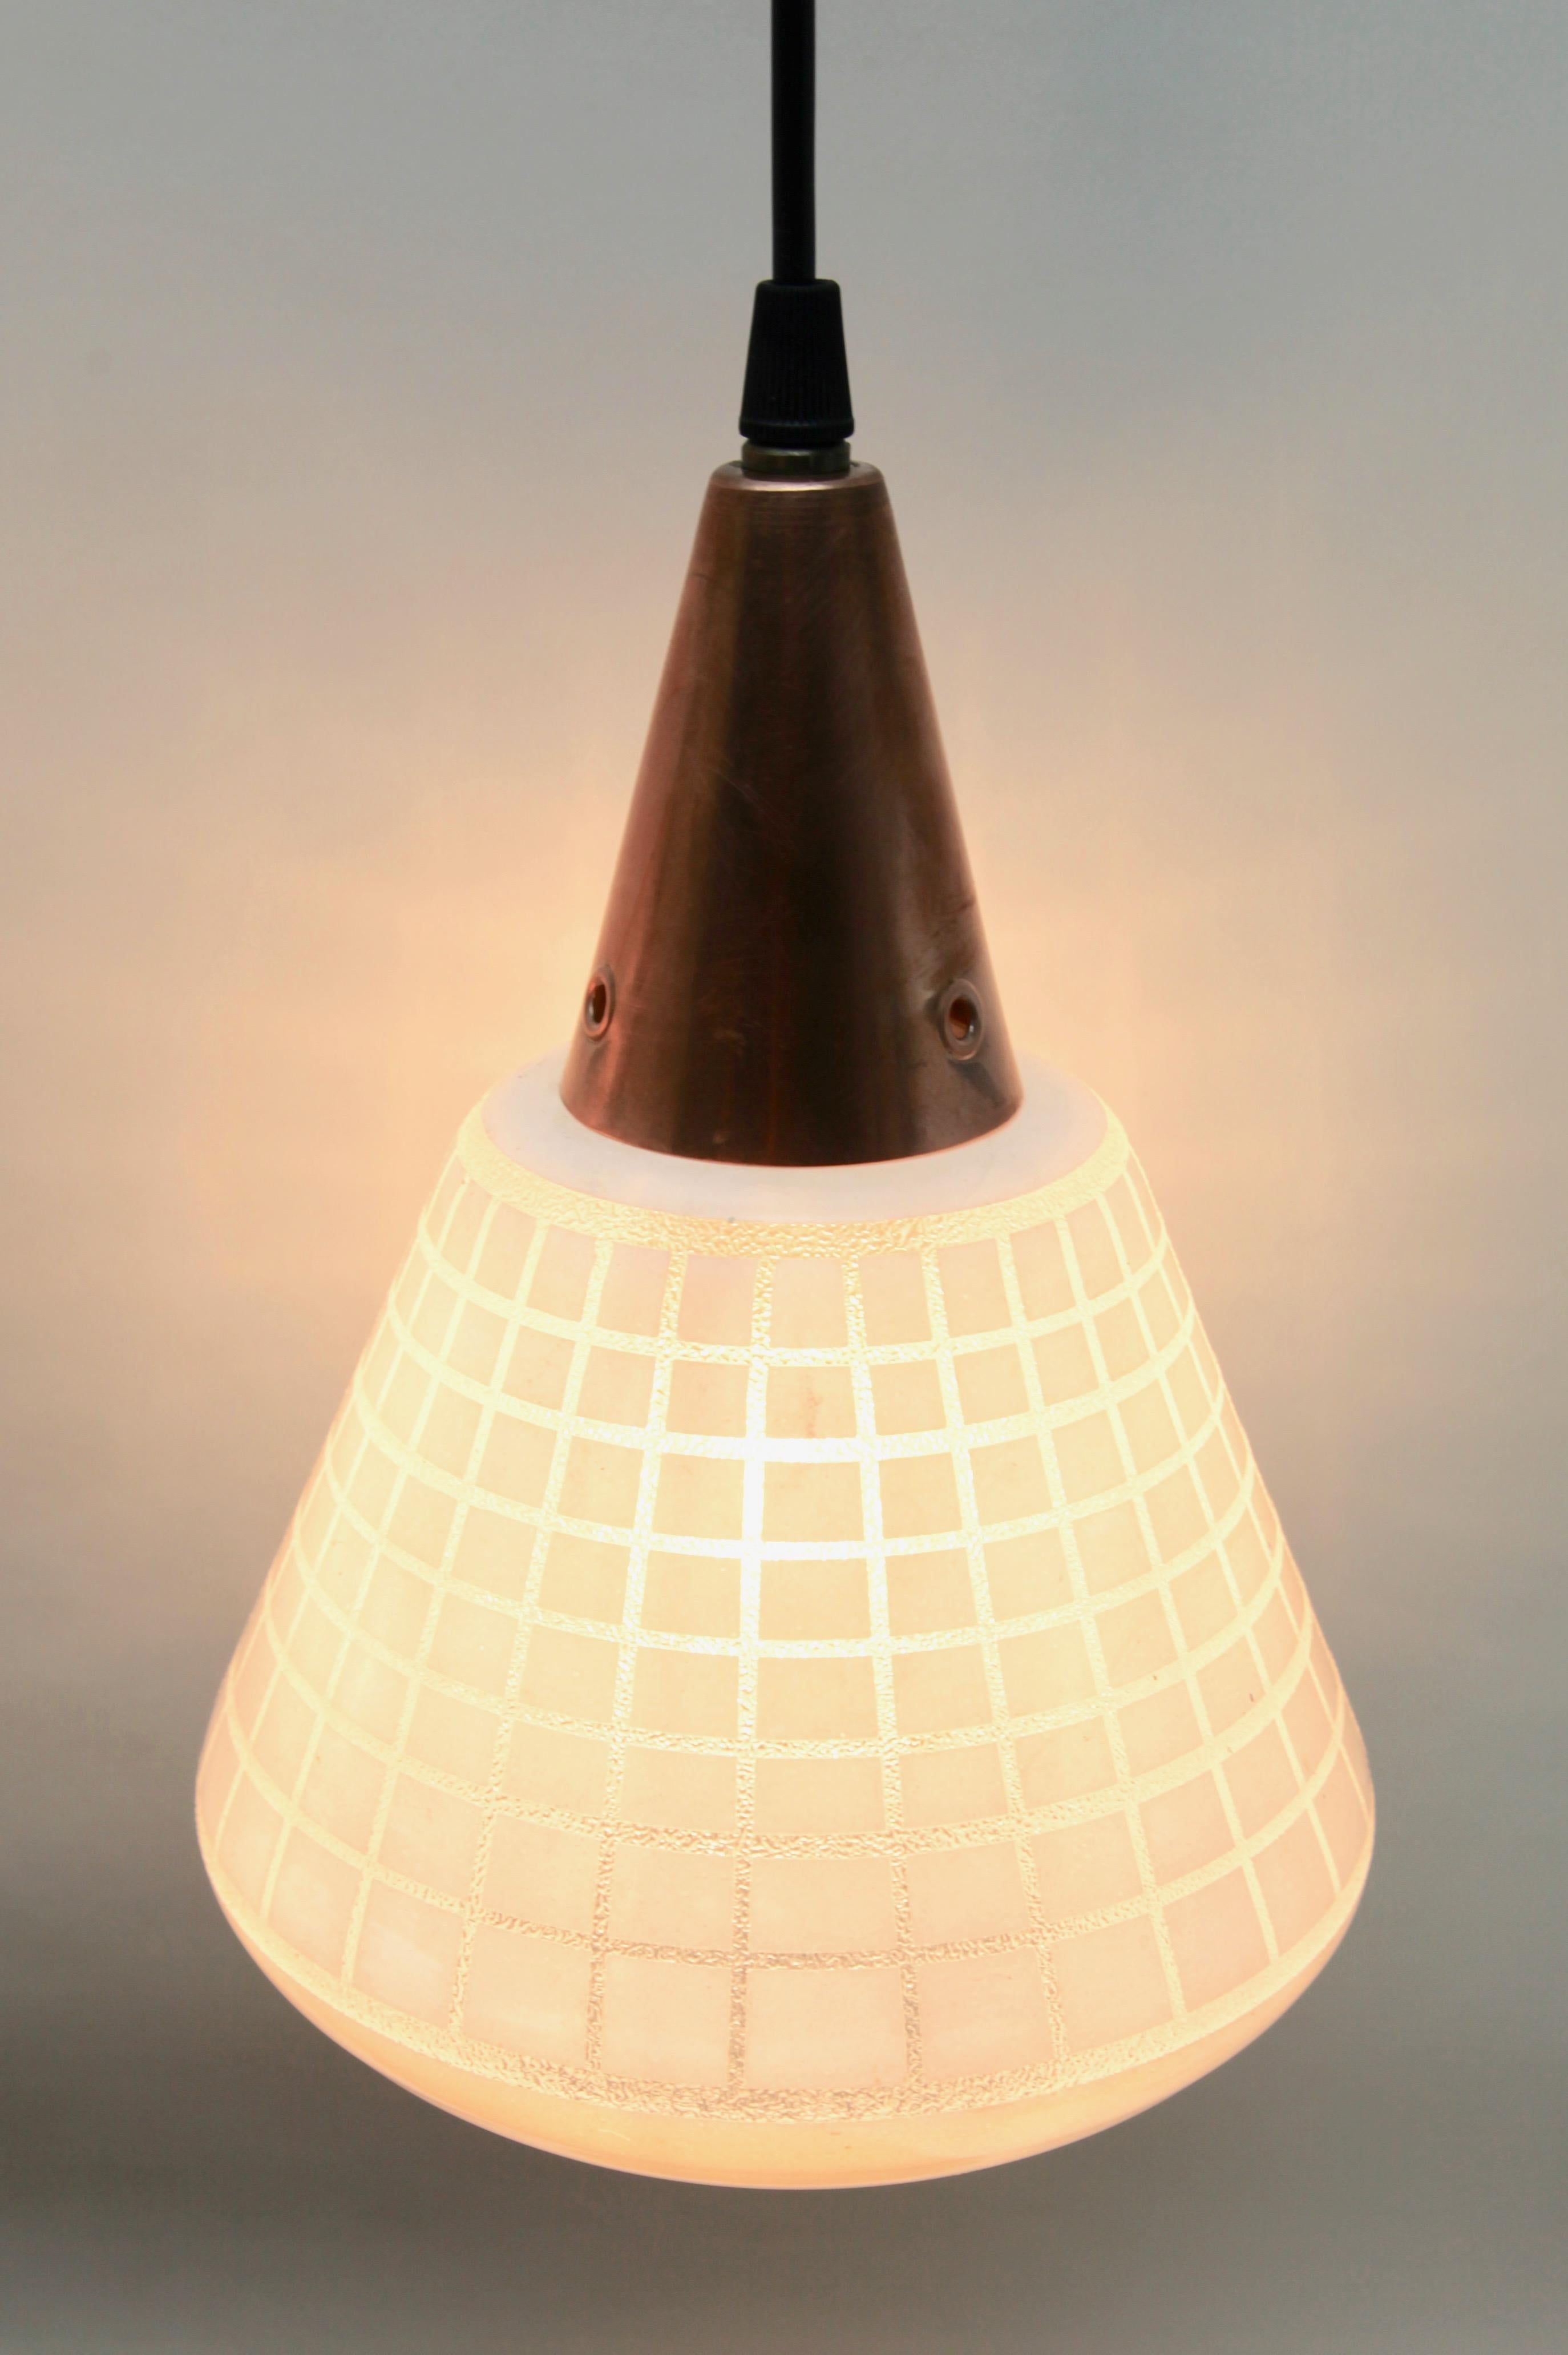 Midcentury Tree Pendant Lights, Teak with Frosted Optical Shade Massive, Belgium For Sale 3